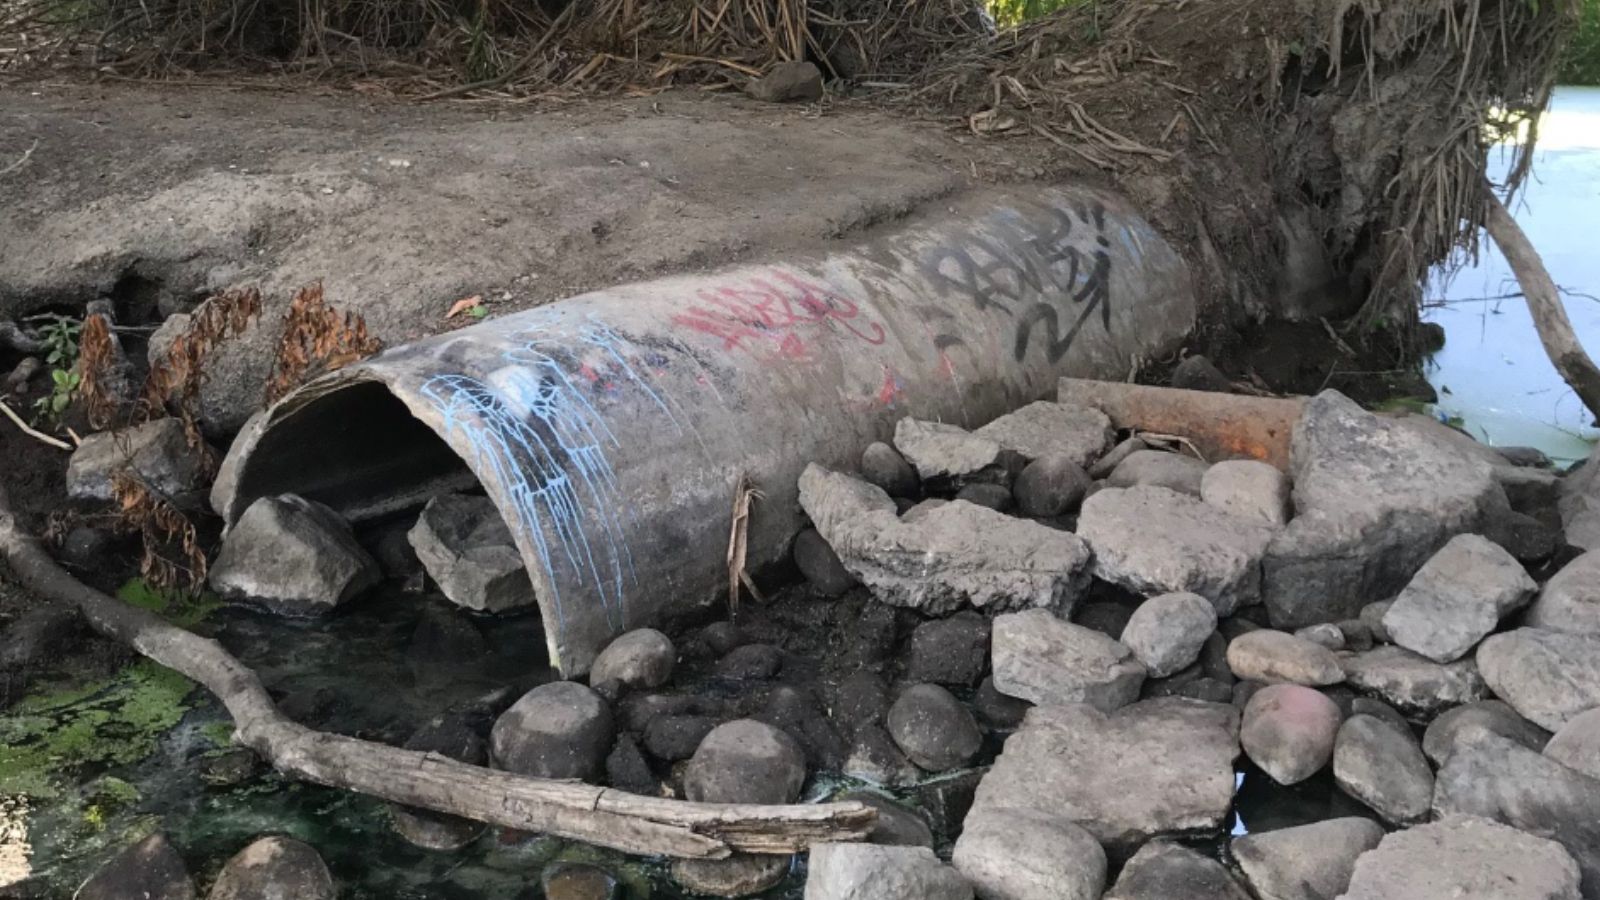 Stagnant conditions, such as those depicted here, are normal for the San Diego River during dry weather. This image shows the remains of an old sewer pipe, no longer in use, submerged in the San Diego River during stagnant, low flow conditions. Sanitary sewer mains, like this one, often run adjacent to urban streams because their siting at the lowest elevations in the watershed takes advantage of gravity flow to convey wastewater. During dry weather, the lack of hydrologic connectivity between the vadose zone, where sanitary sewer pipes are typically located, and the river allows for the buildup of anthropogenic contaminants in the subsurface. Then, during storm events, when adjacent areas become submerged (note high water line from debris on trees), sewage-contaminated source areas are flushed and water quality benchmarks for fecal indicator bacteria are exceeded by orders of magnitude.  Photo credit: Natalie Mladenov